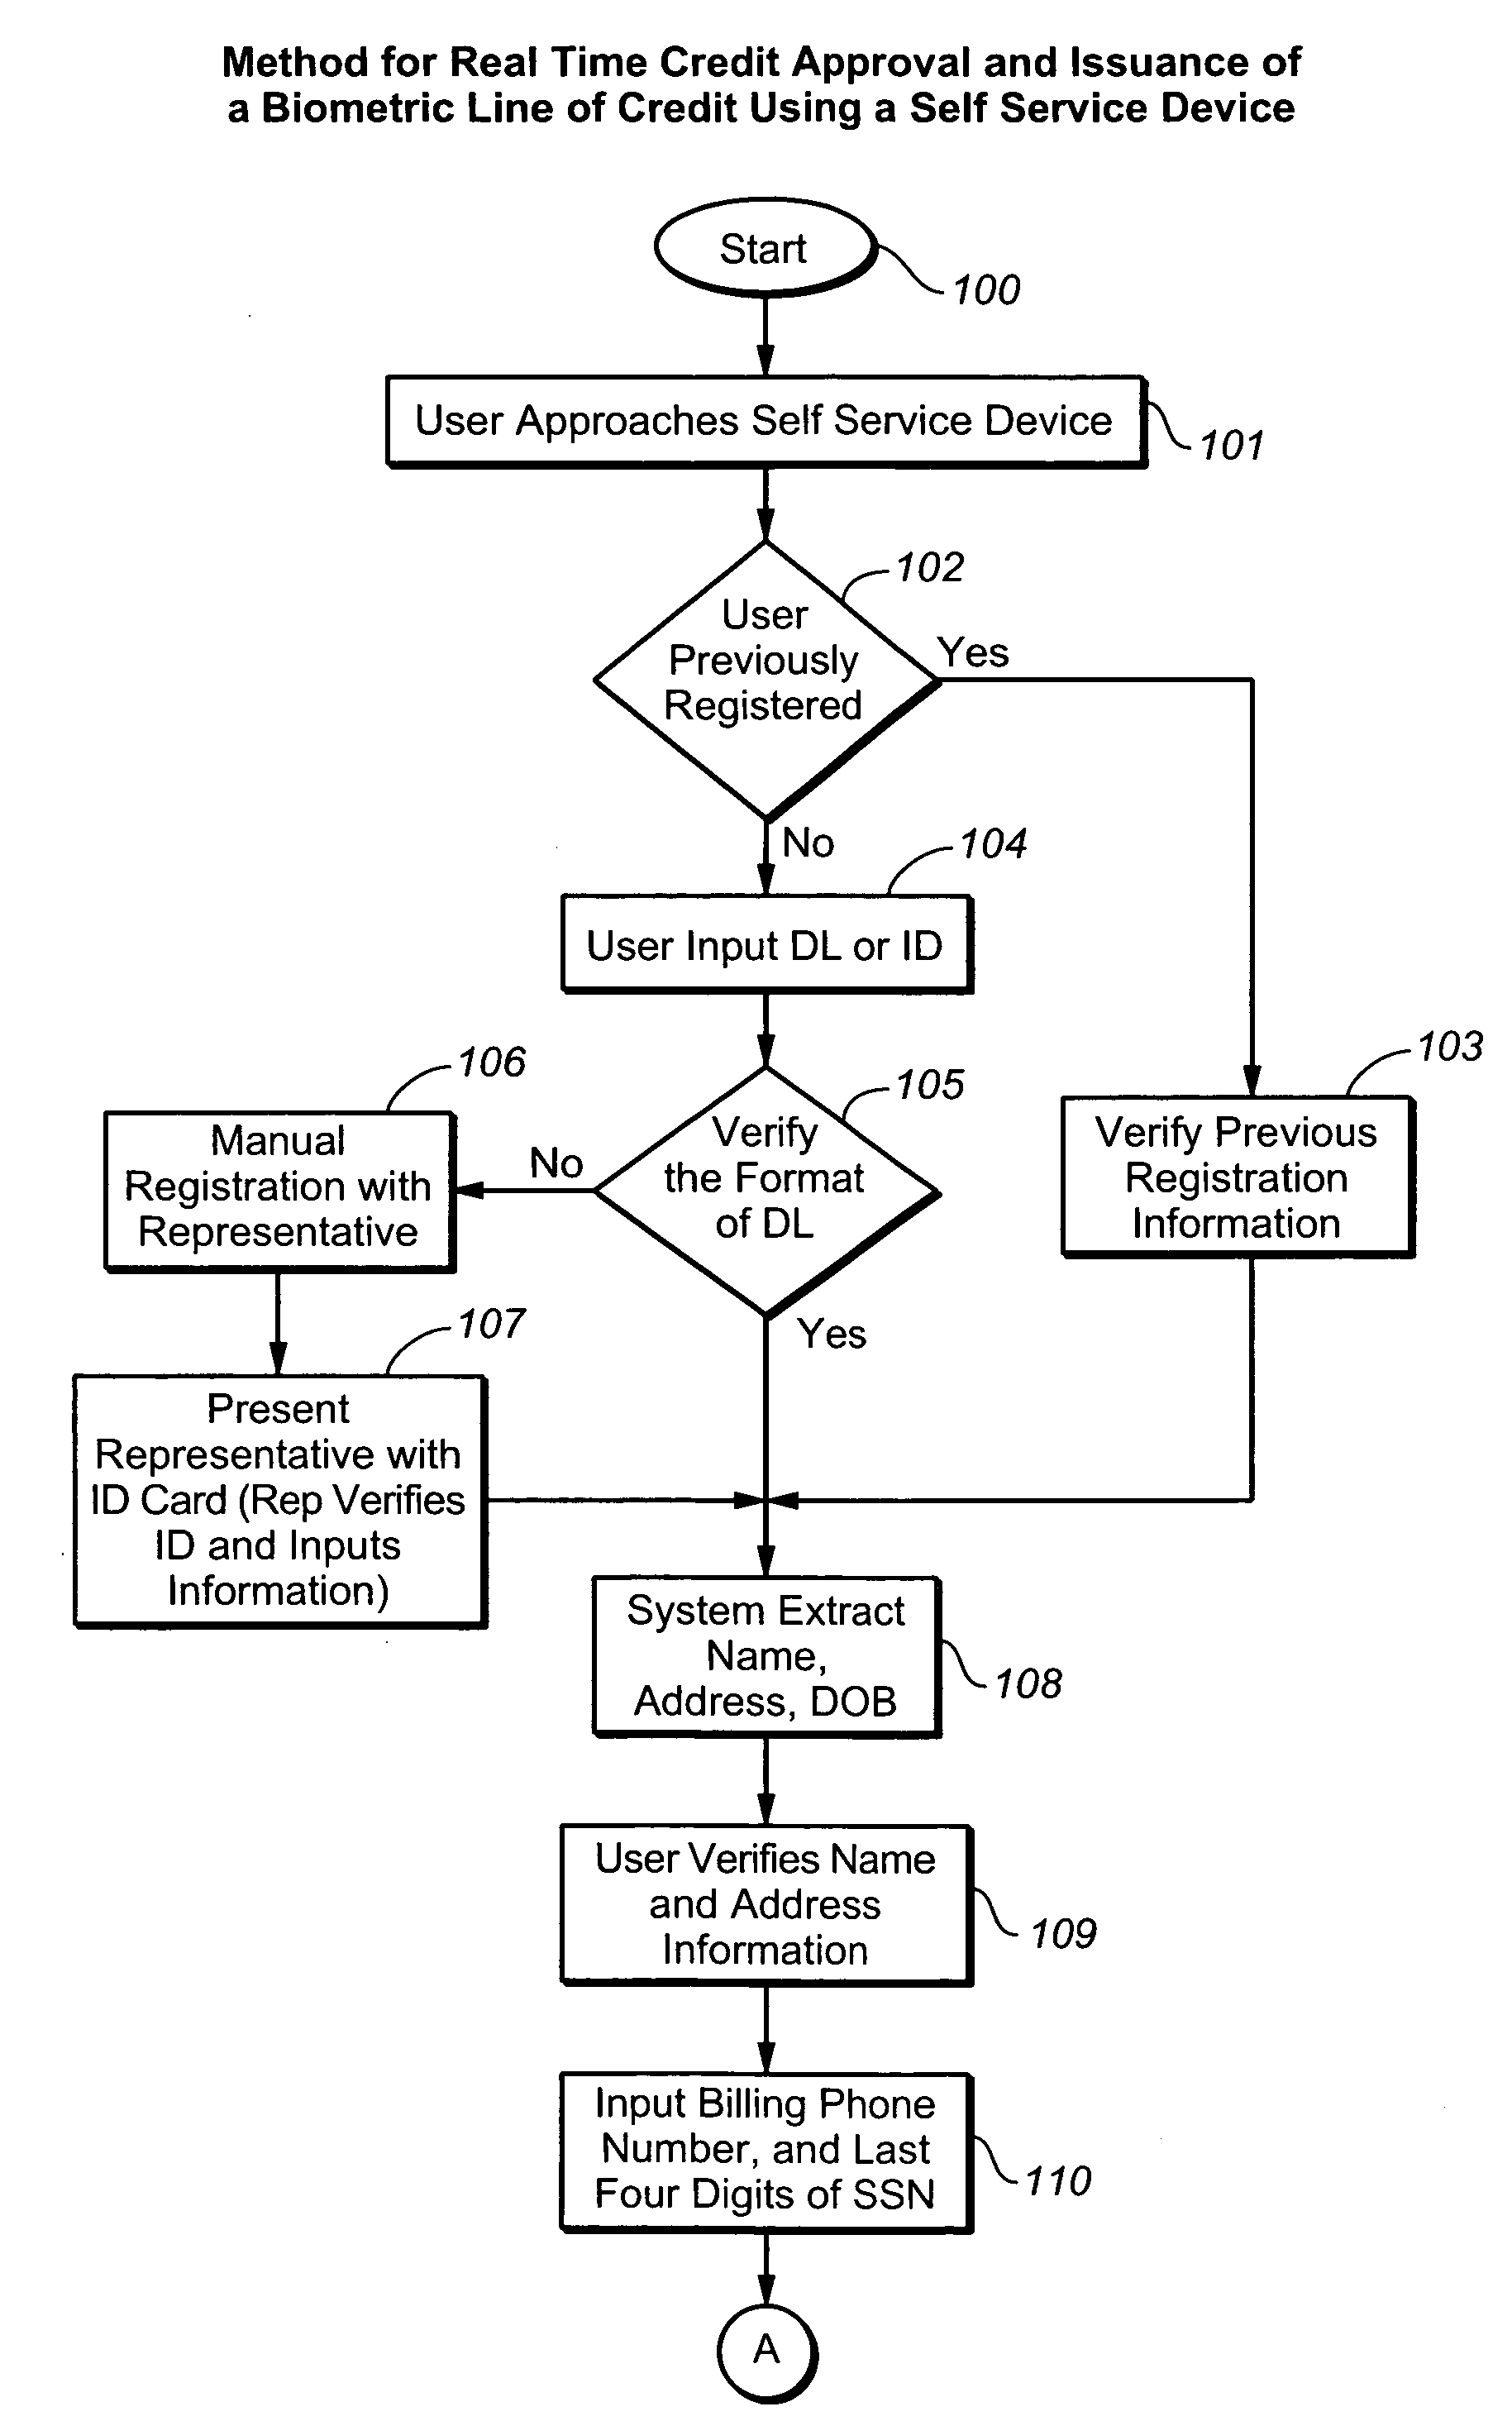 Methods and systems for performing tokenless financial transactions over a transaction network using biometric data